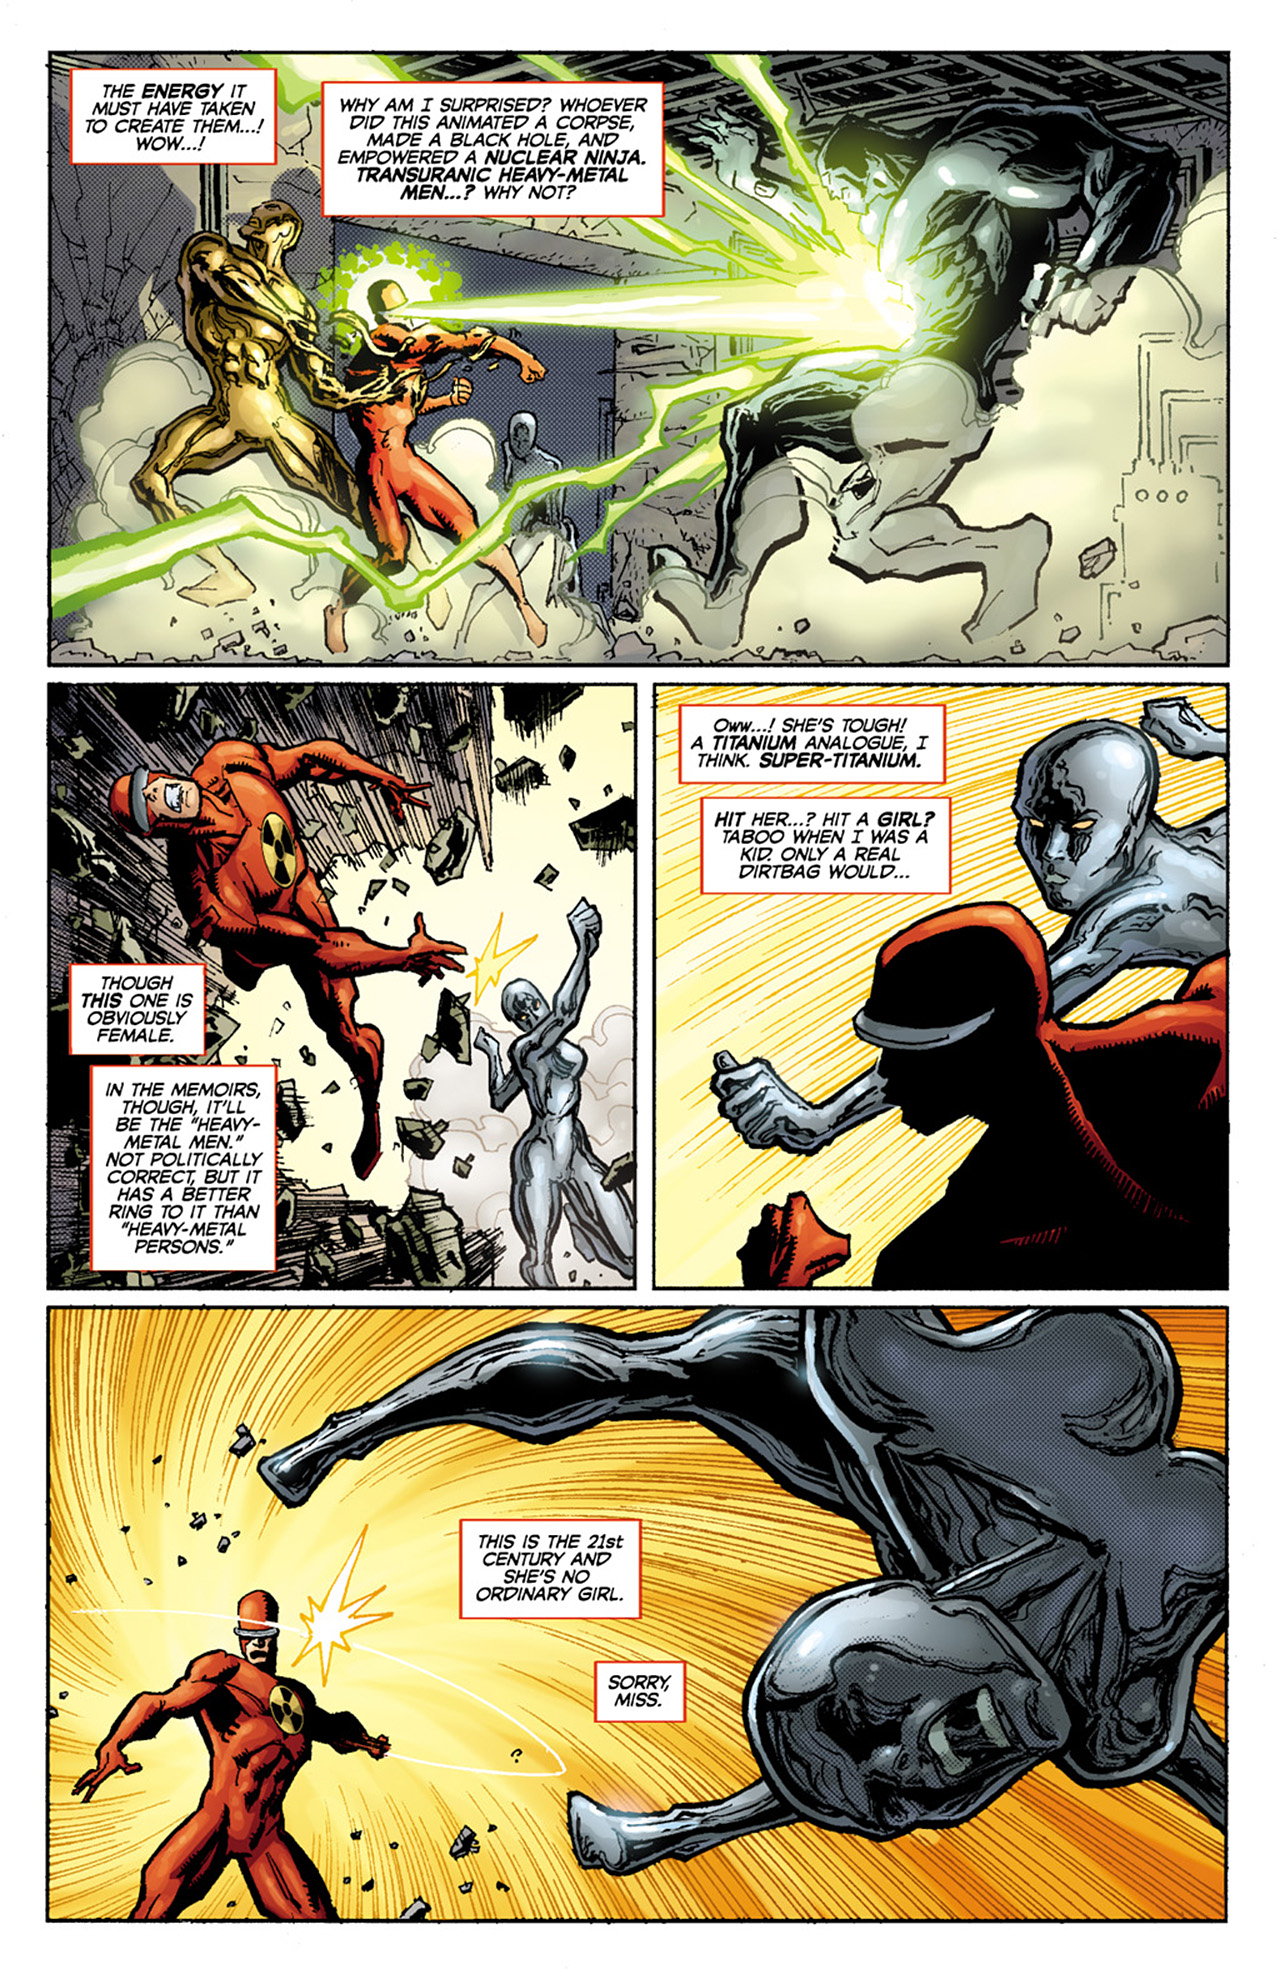 Doctor Solar, Man of the Atom (2010) Issue #7 #8 - English 10